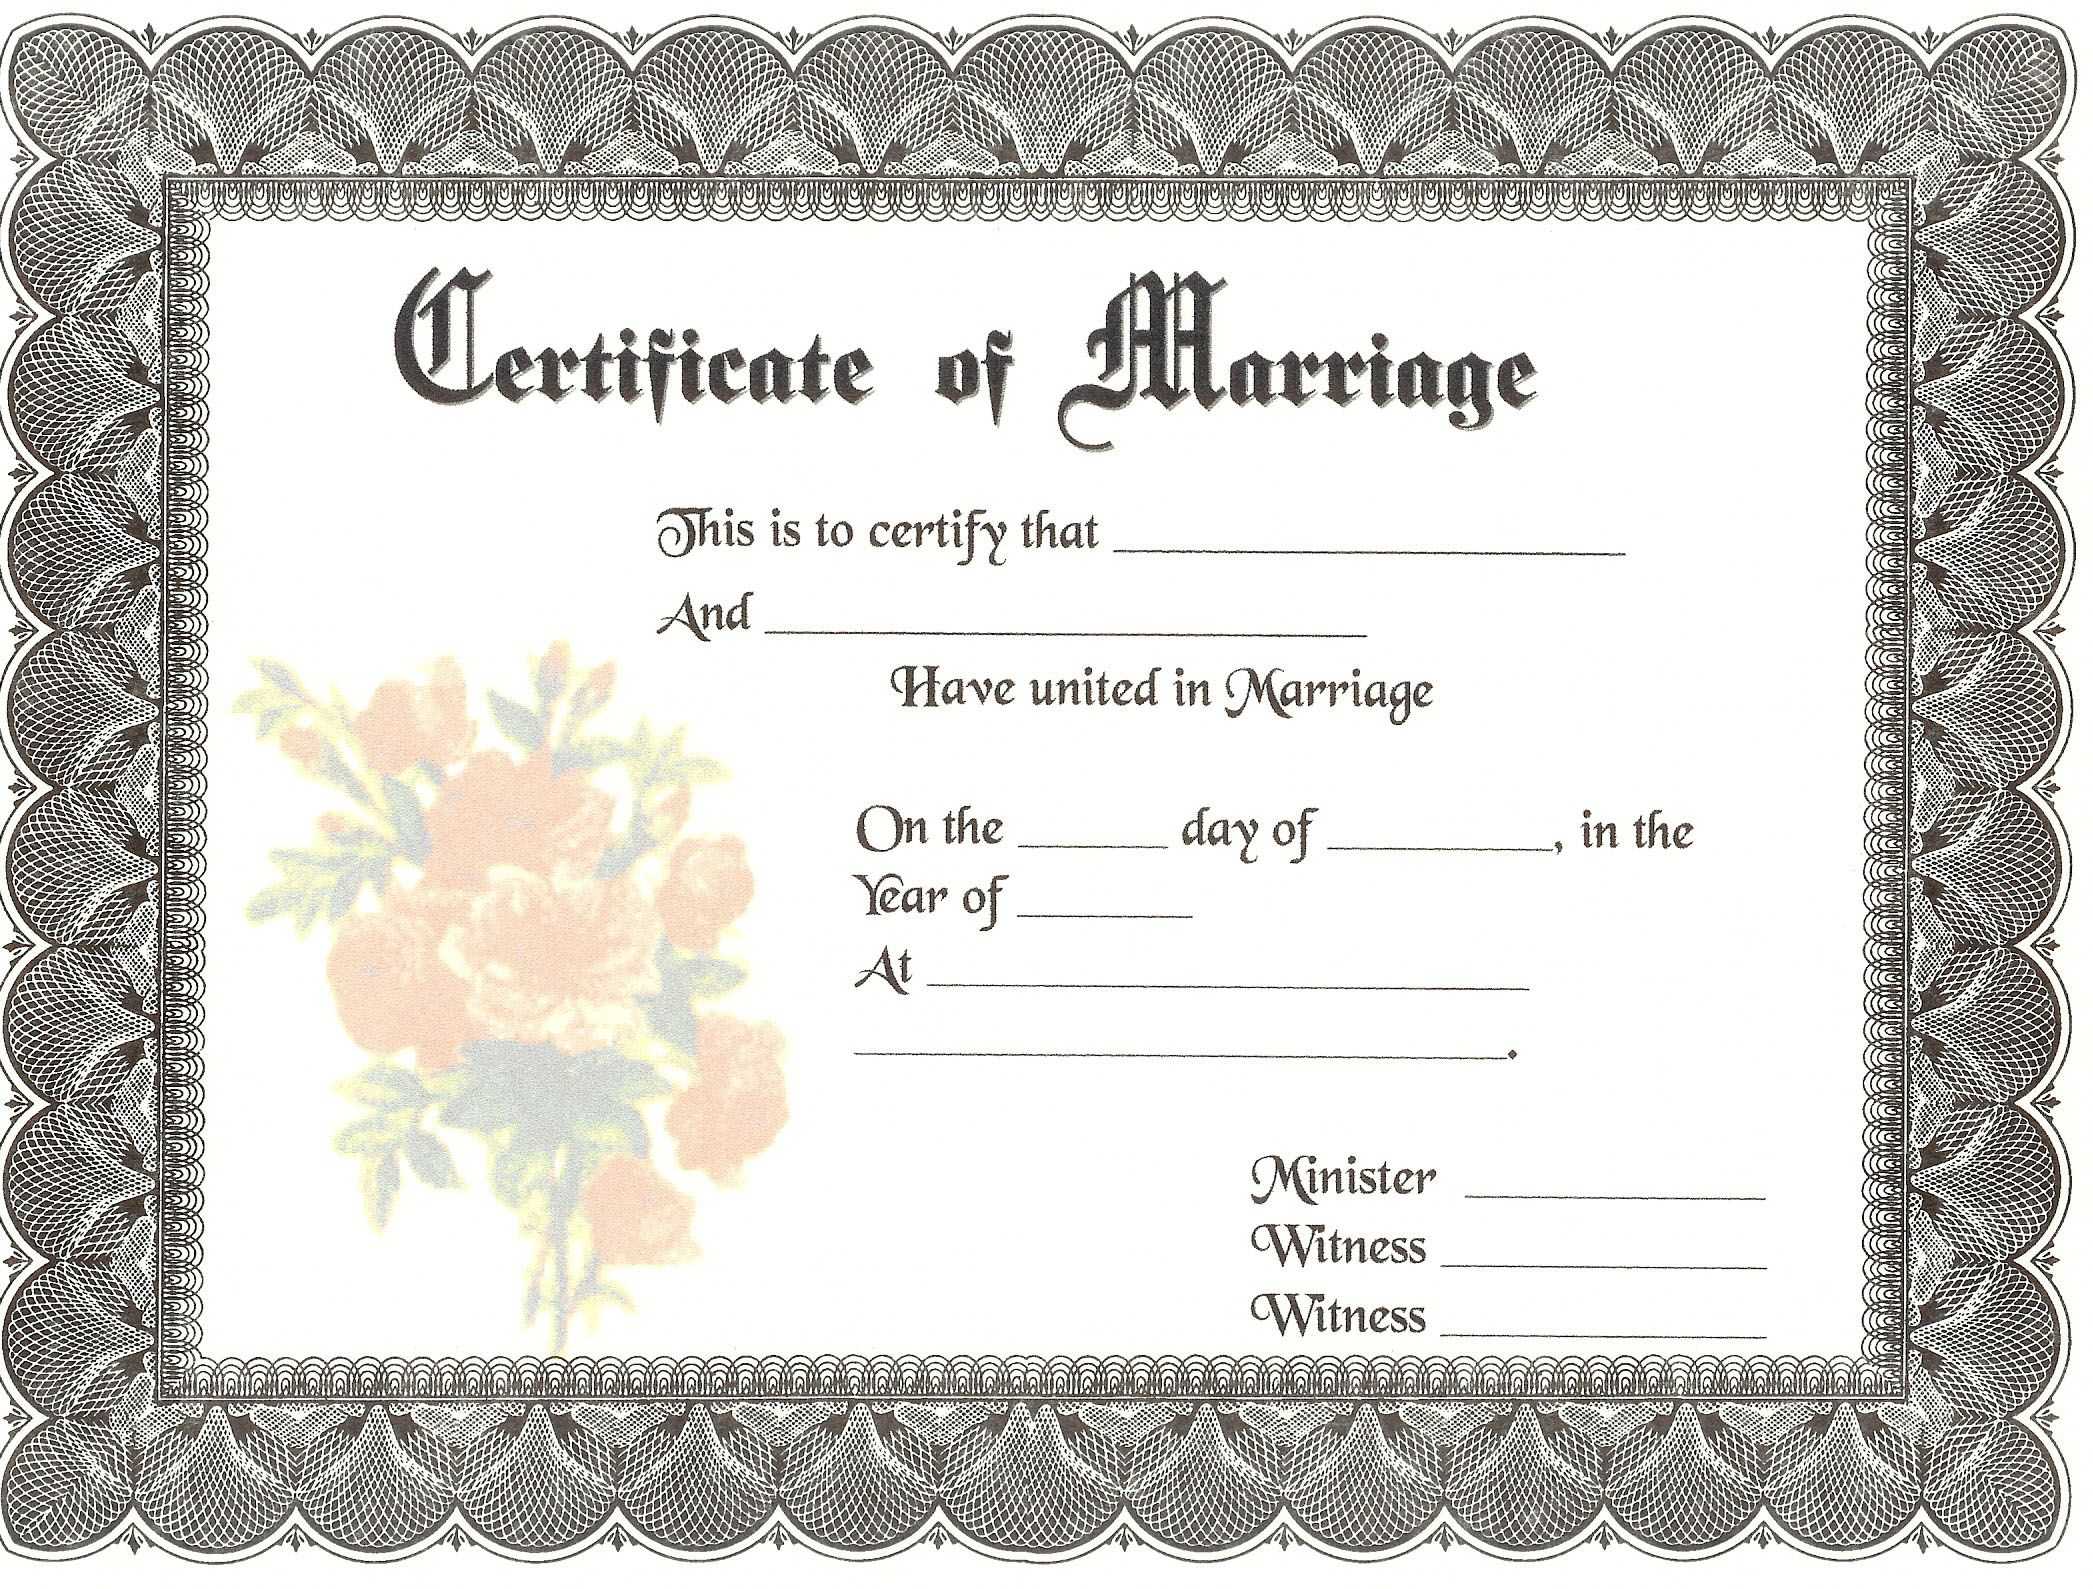 Blank Marriage Certificates | Download Blank Marriage In Blank Marriage Certificate Template